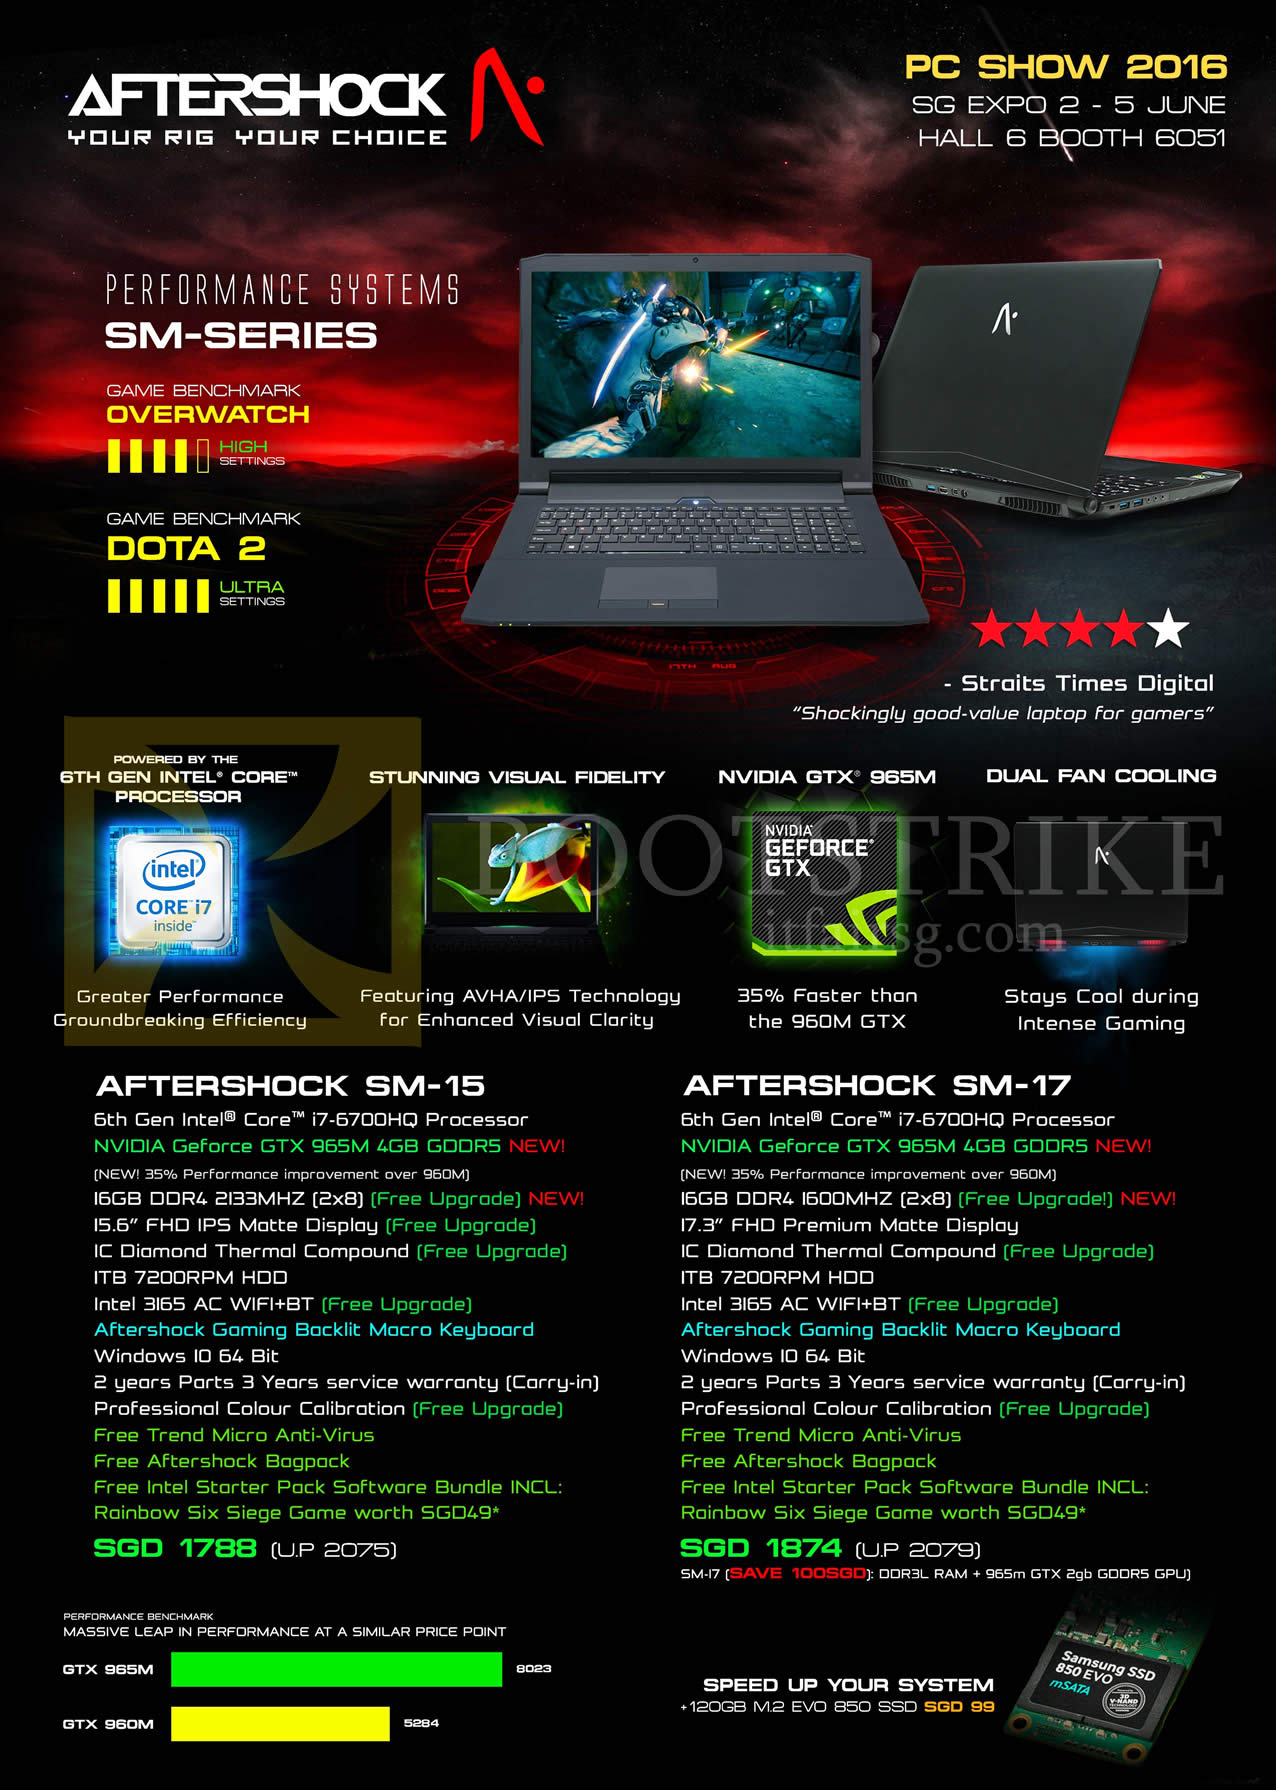 PC SHOW 2016 price list image brochure of Aftershock Notebooks SM-15, SM-17